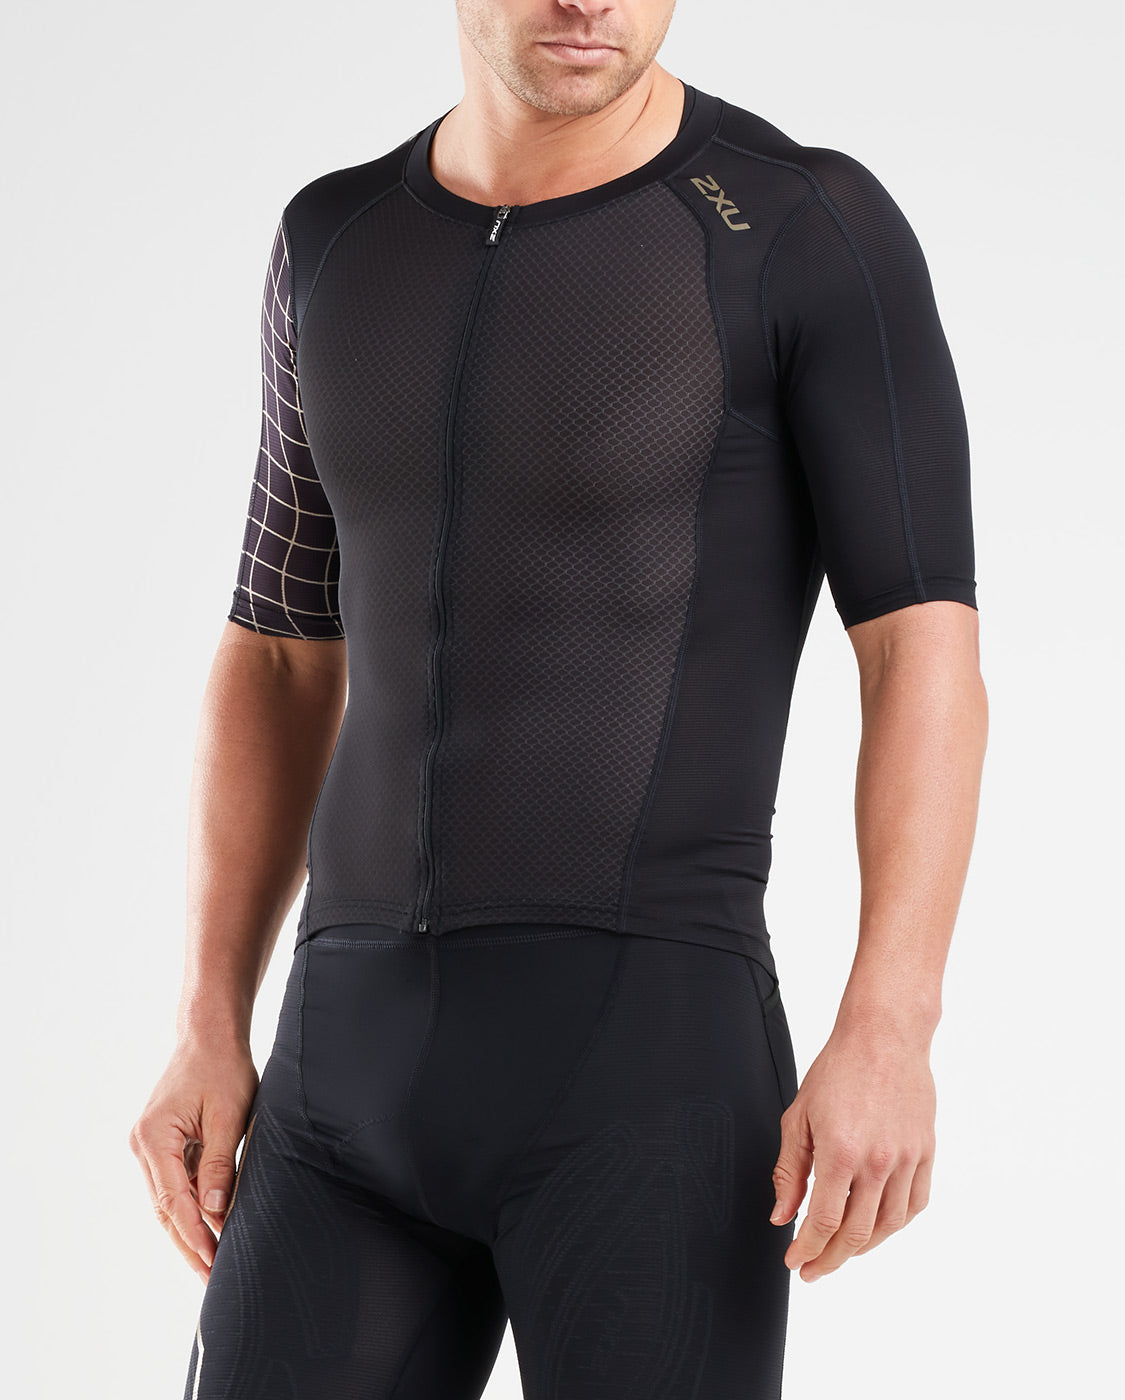 Compression Sleeved Top –